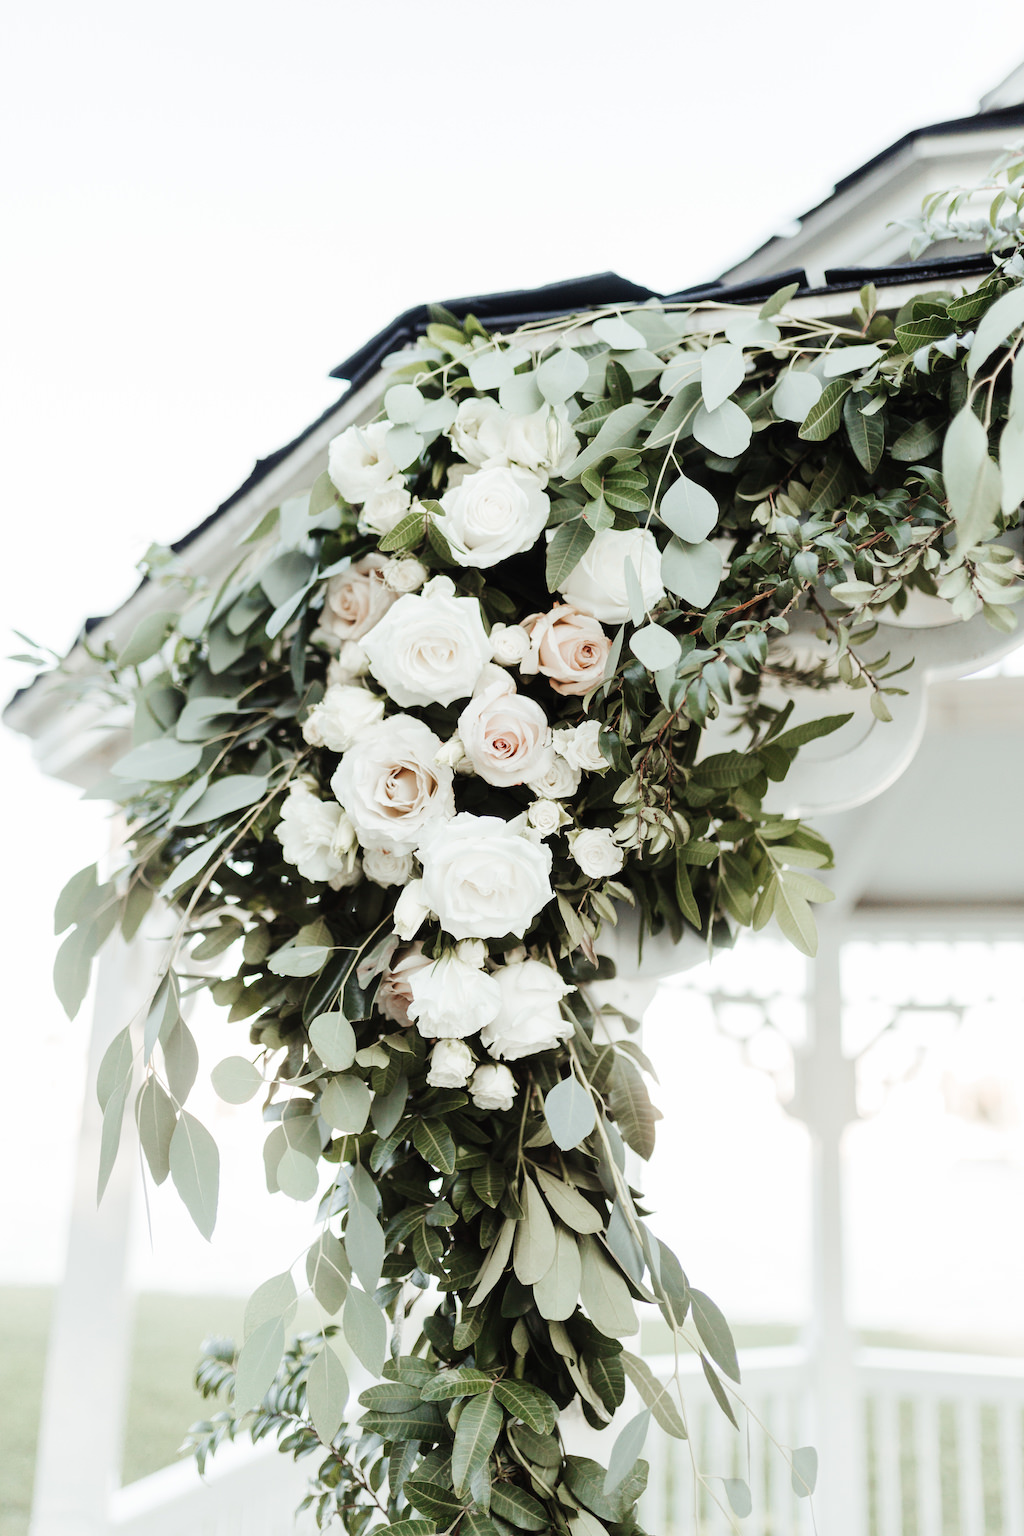 Garden Inspired Wedding Decor, White and Blush Pink Rose Floral Arrangement on Ceremony Gazebo | Tampa Bay Florist Monarch Events and Design